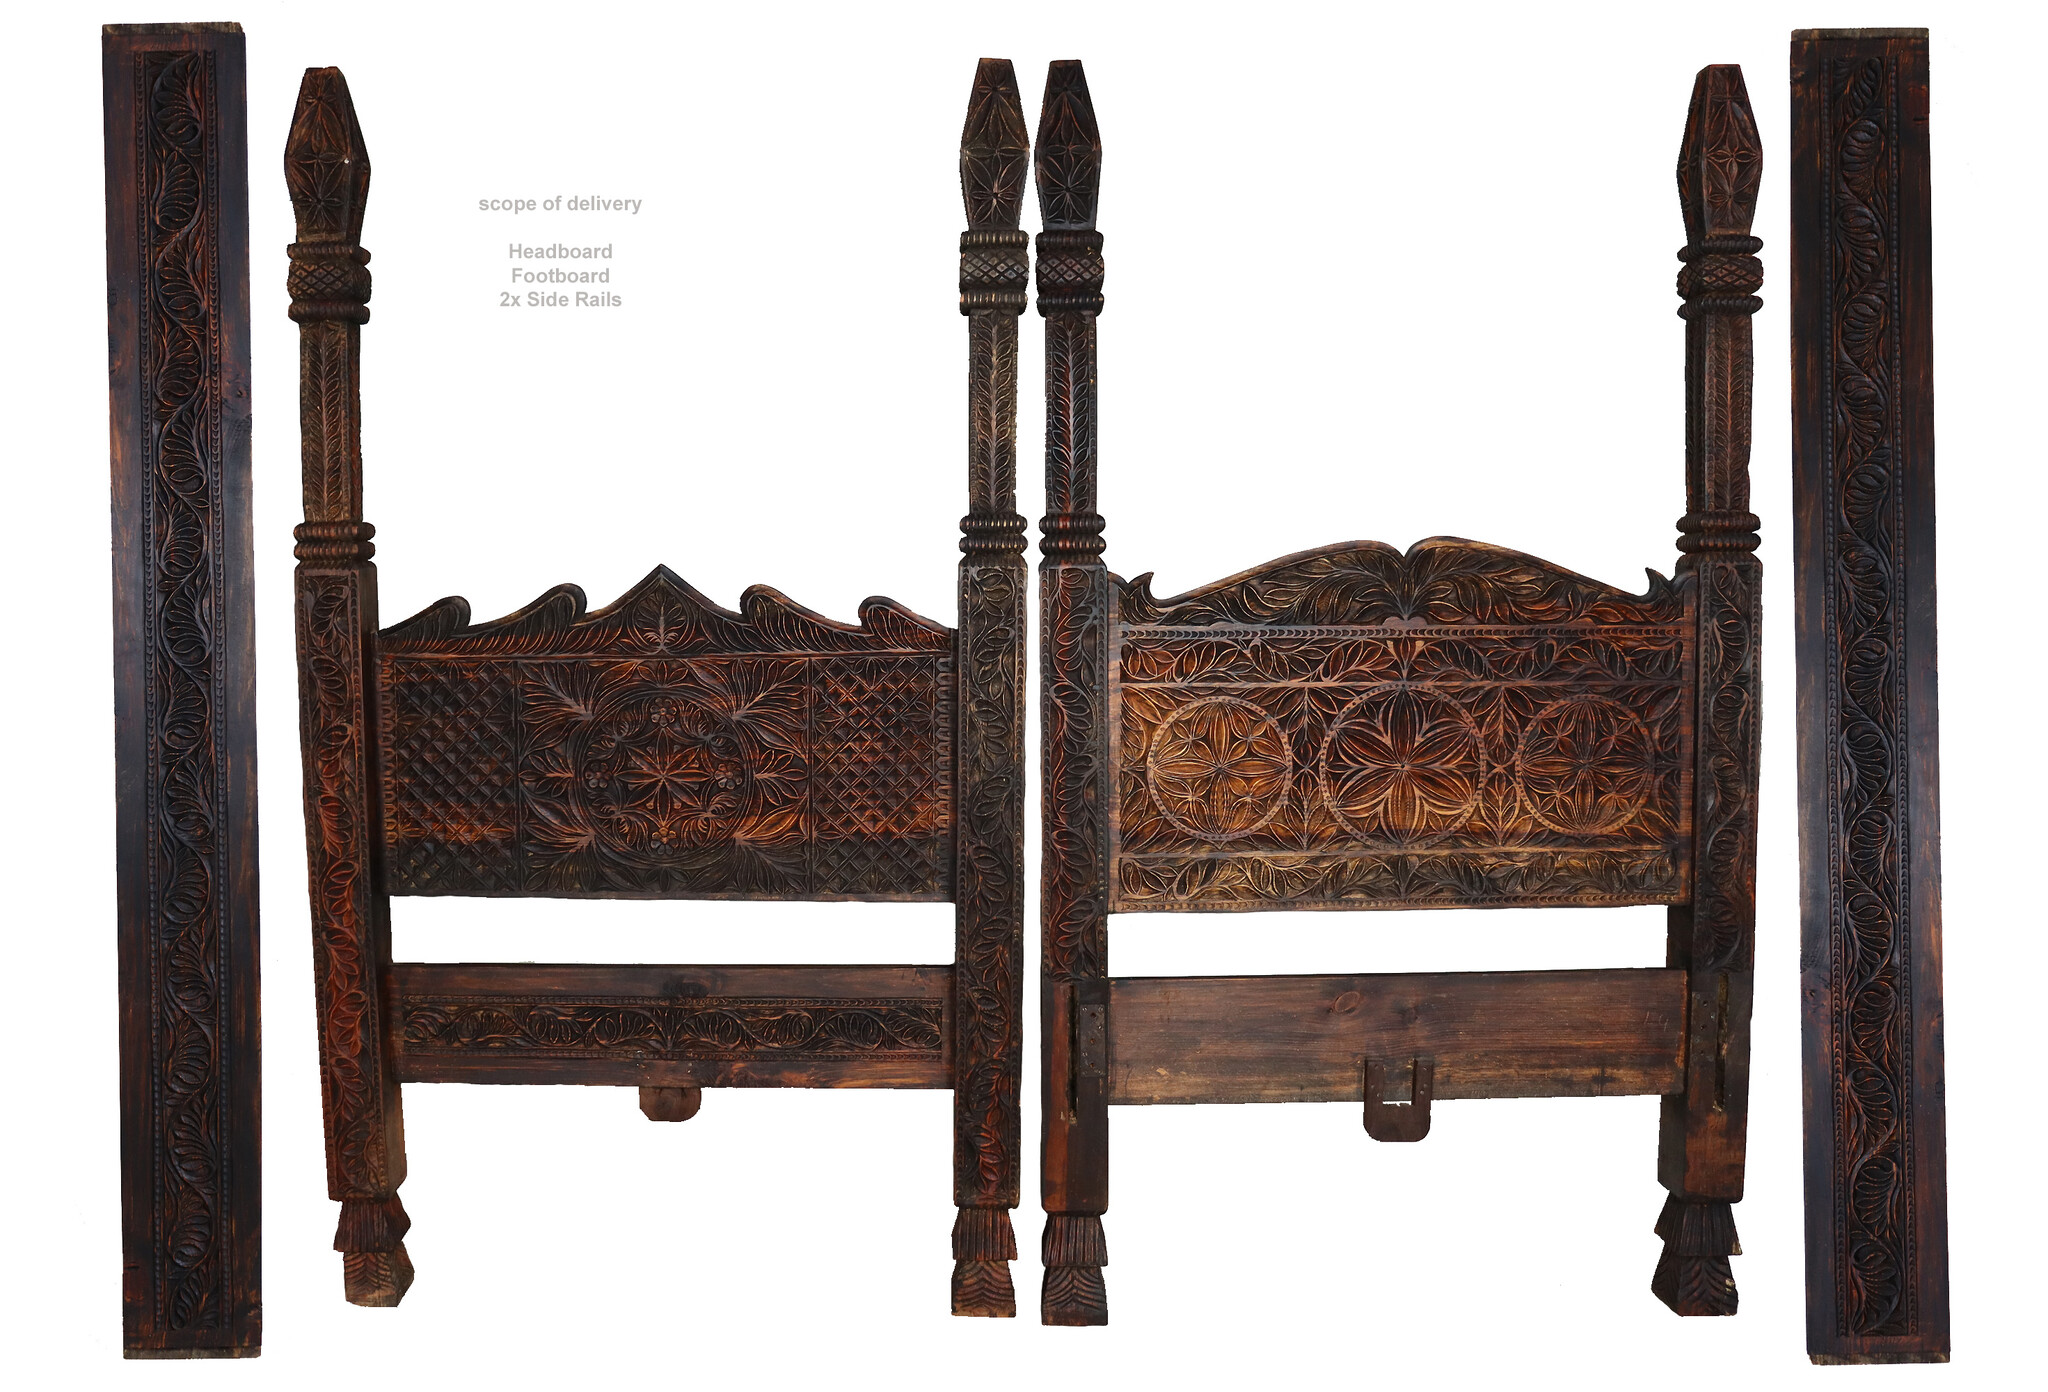 single bed four-poster bed guest bed bedroom orient hand-carved solid wood bed from Nuristan Afghanistan 2000